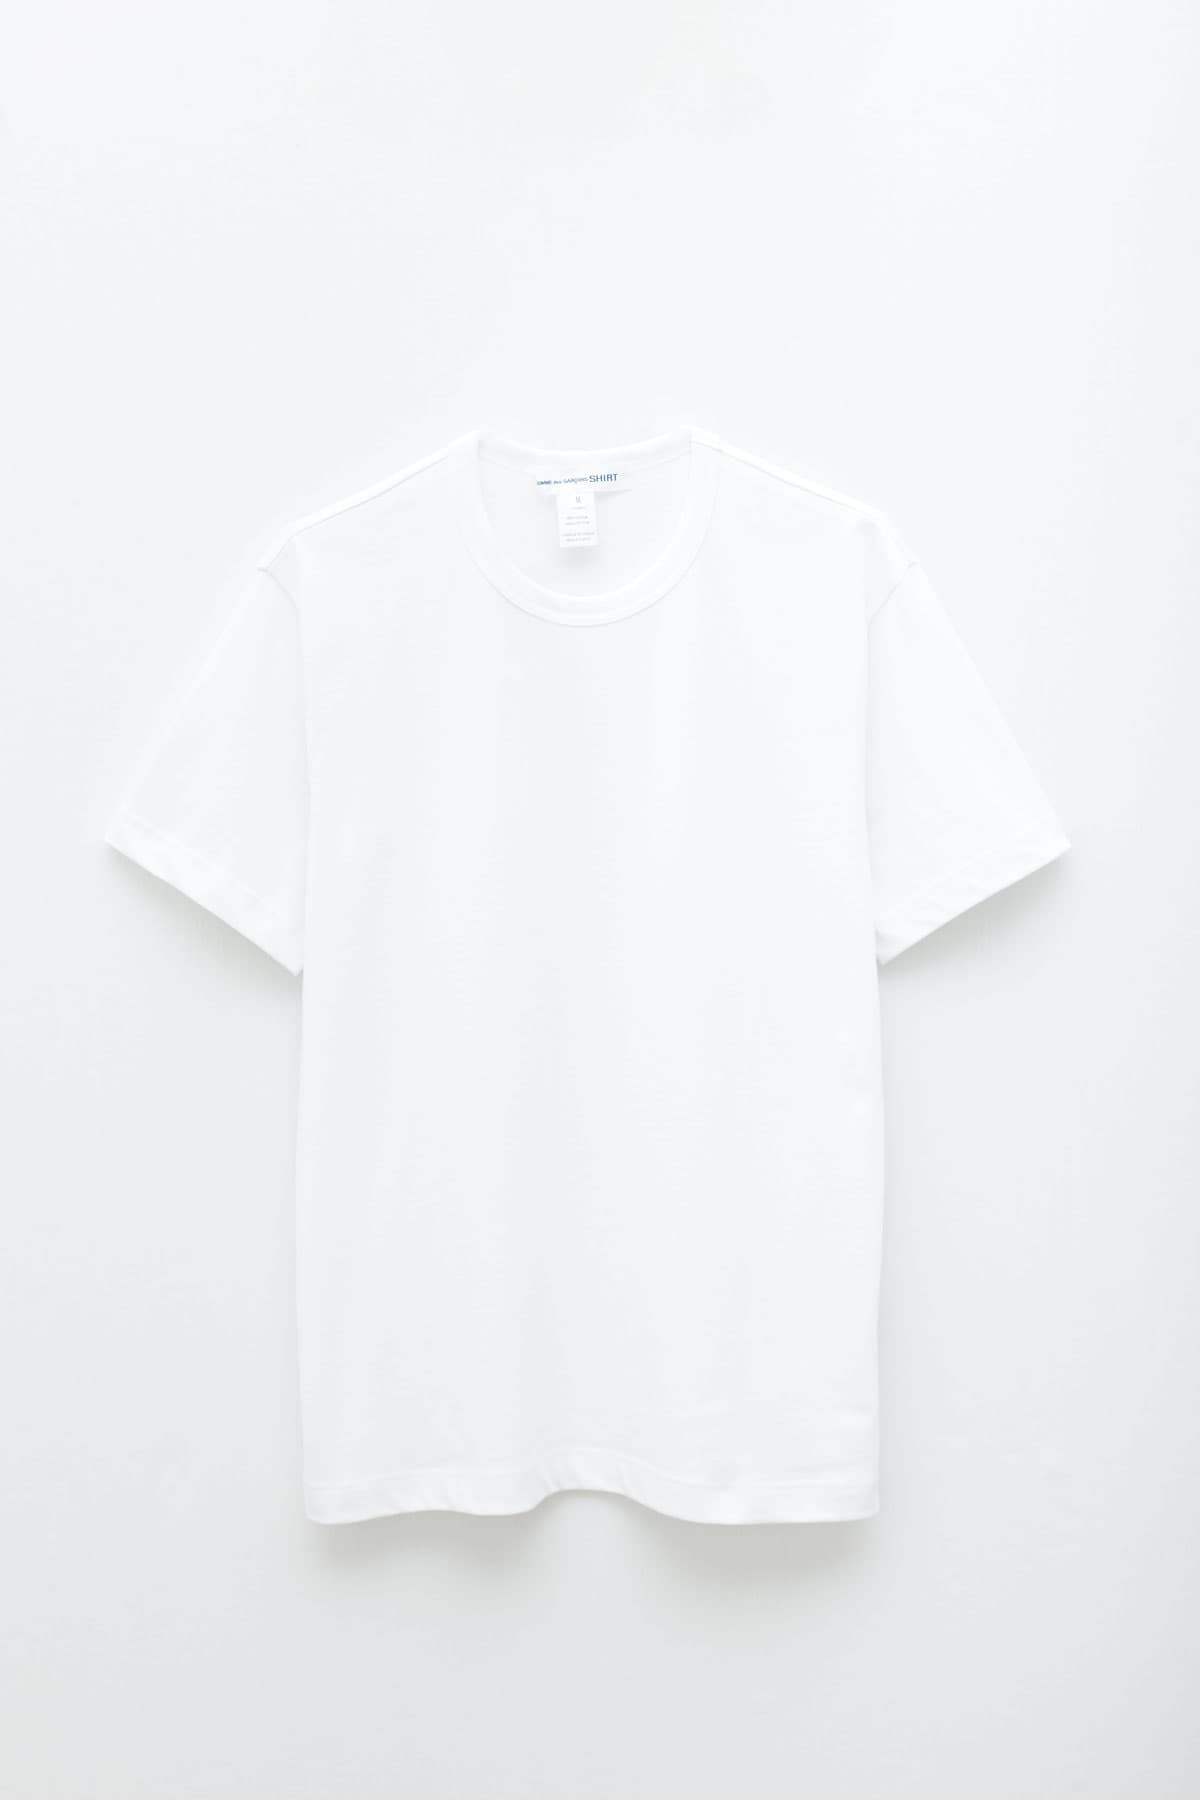 COMME DES GARCONS SHIRT FOREVER WHITE T-SHIRT IAMNUE